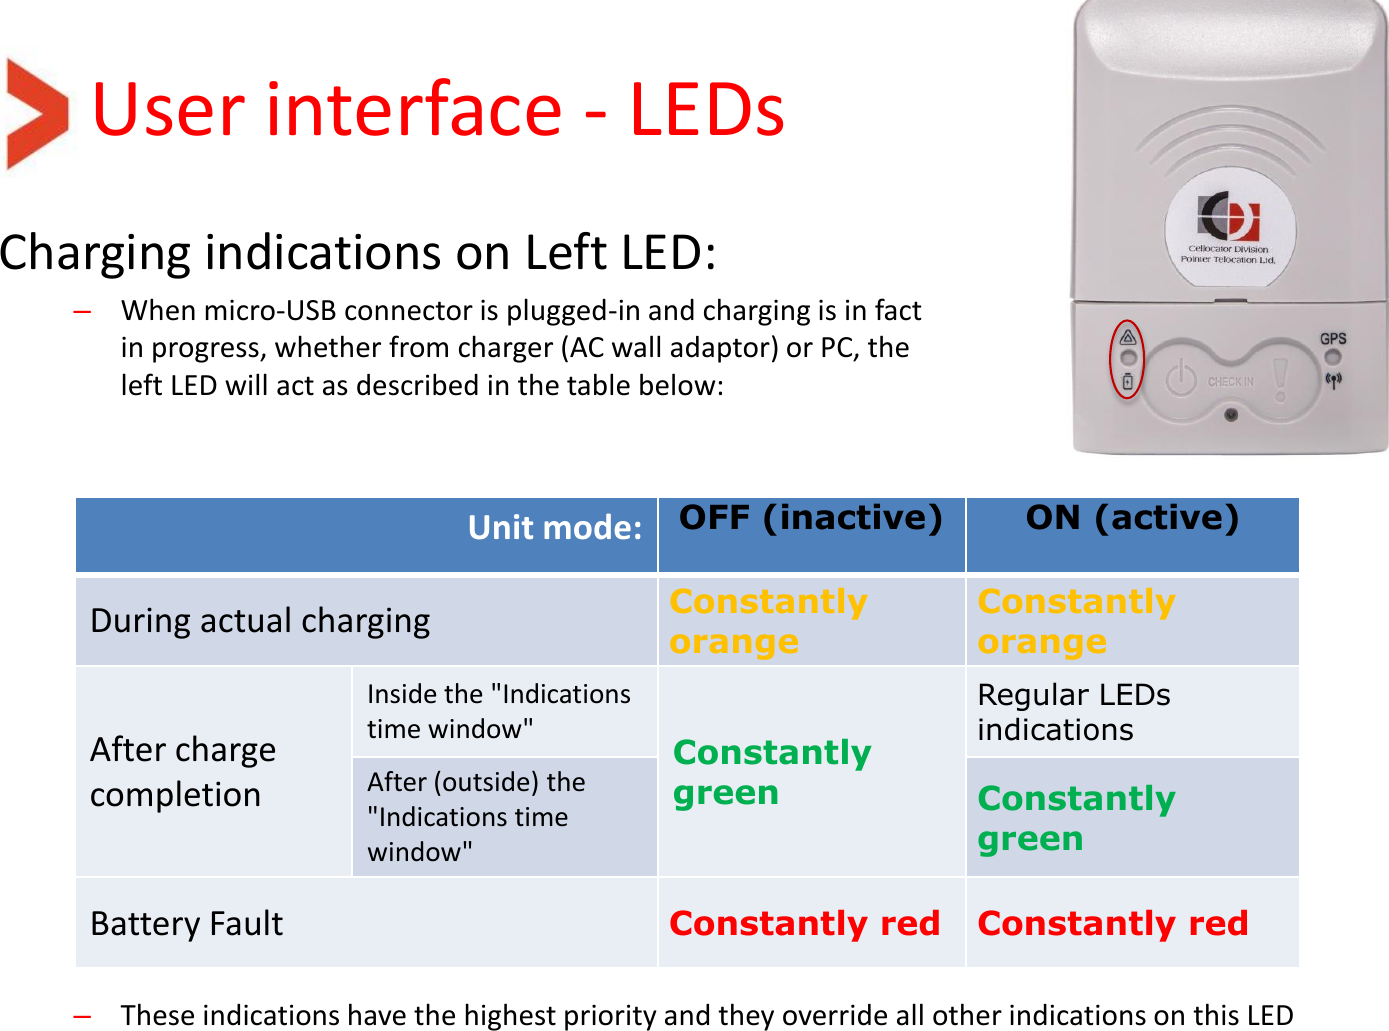 User interface - LEDs Charging indications on Left LED: –When micro-USB connector is plugged-in and charging is in fact  in progress, whether from charger (AC wall adaptor) or PC, the  left LED will act as described in the table below:              –These indications have the highest priority and they override all other indications on this LED   Unit mode: OFF (inactive) ON (active) During actual charging Constantly orange Constantly orange After charge completion Inside the &quot;Indications time window&quot; Constantly green Regular LEDs indications After (outside) the &quot;Indications time window&quot; Constantly green Battery Fault Constantly red Constantly red 